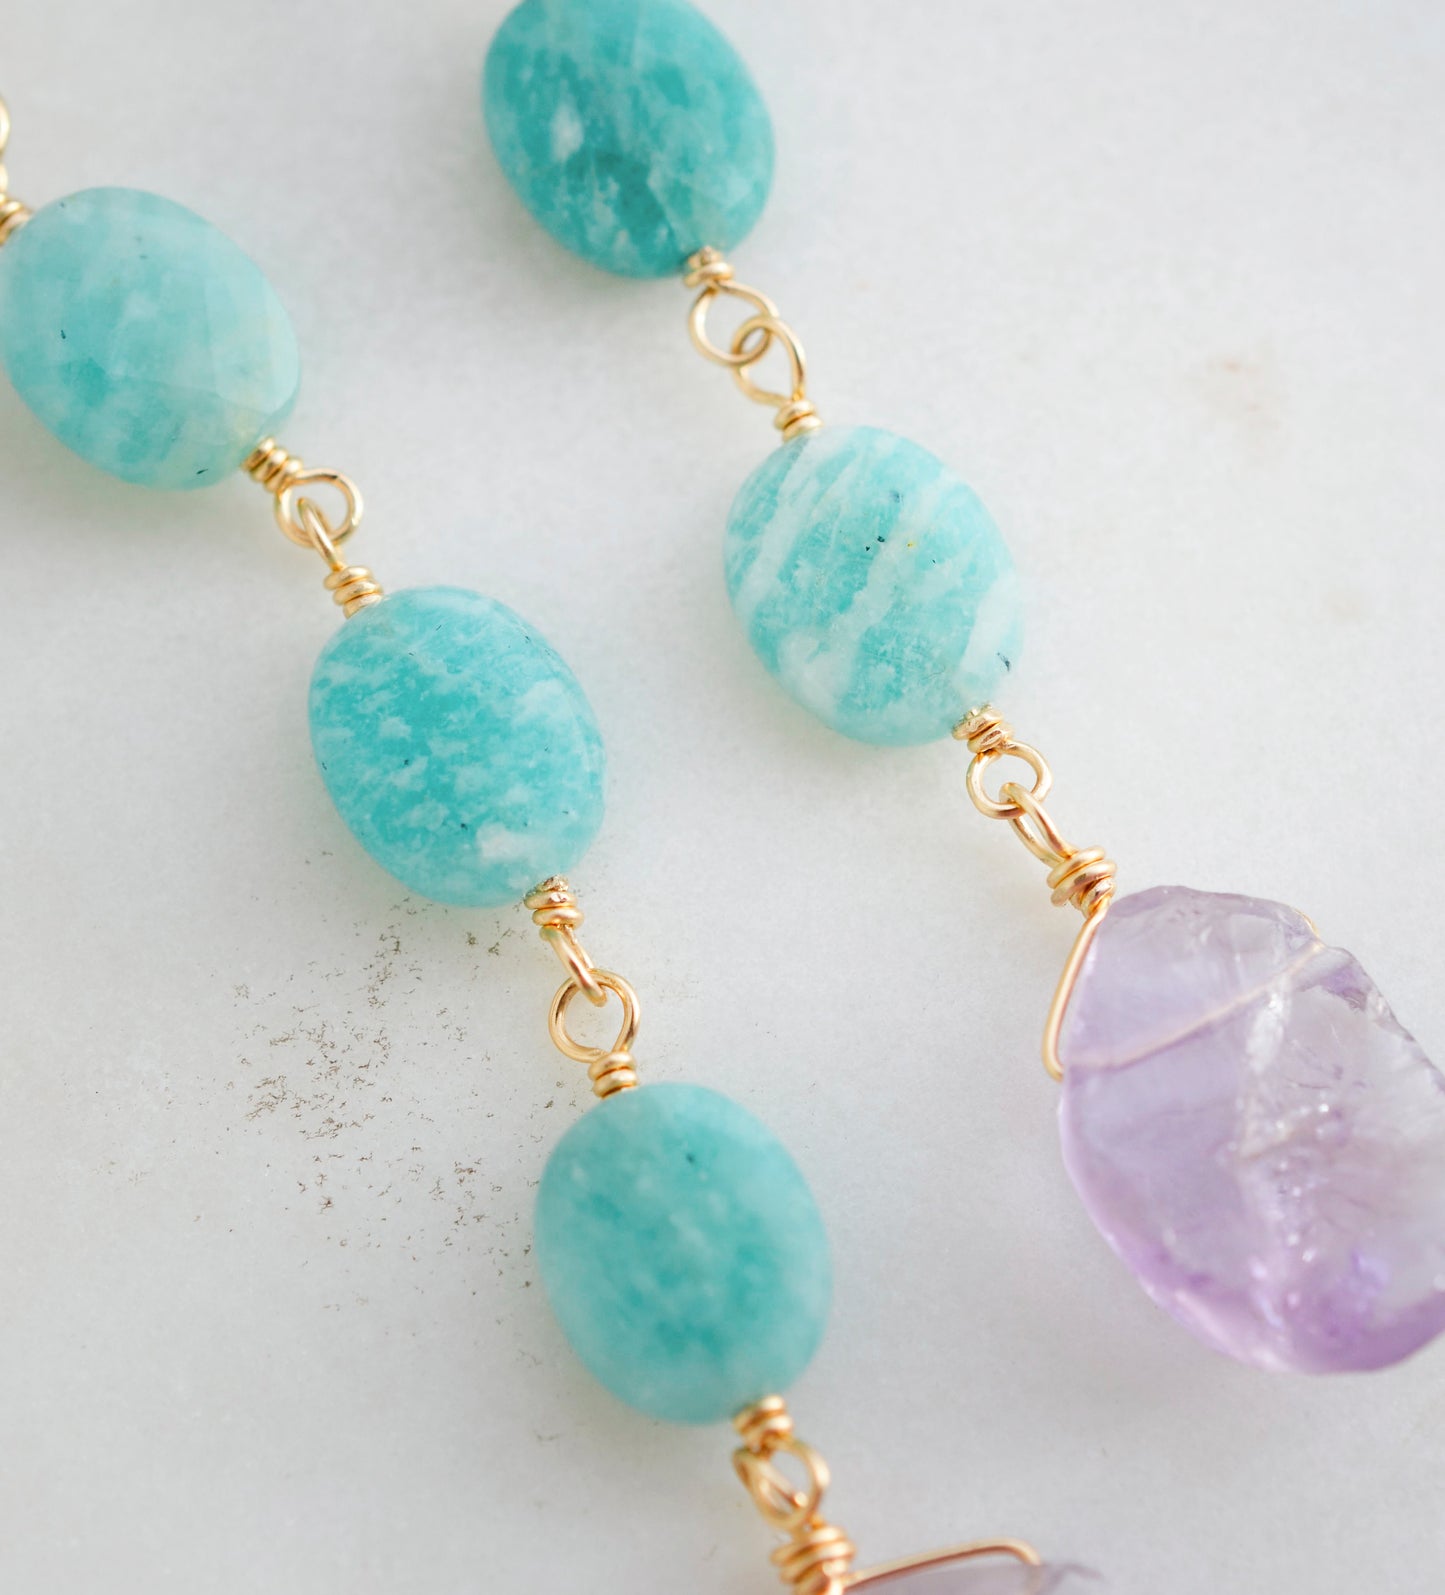 Three Amazonite faceted oval stones hang over raw, pale purple Amethyst crystals. Shown in the 14k gold filled style. Close up.